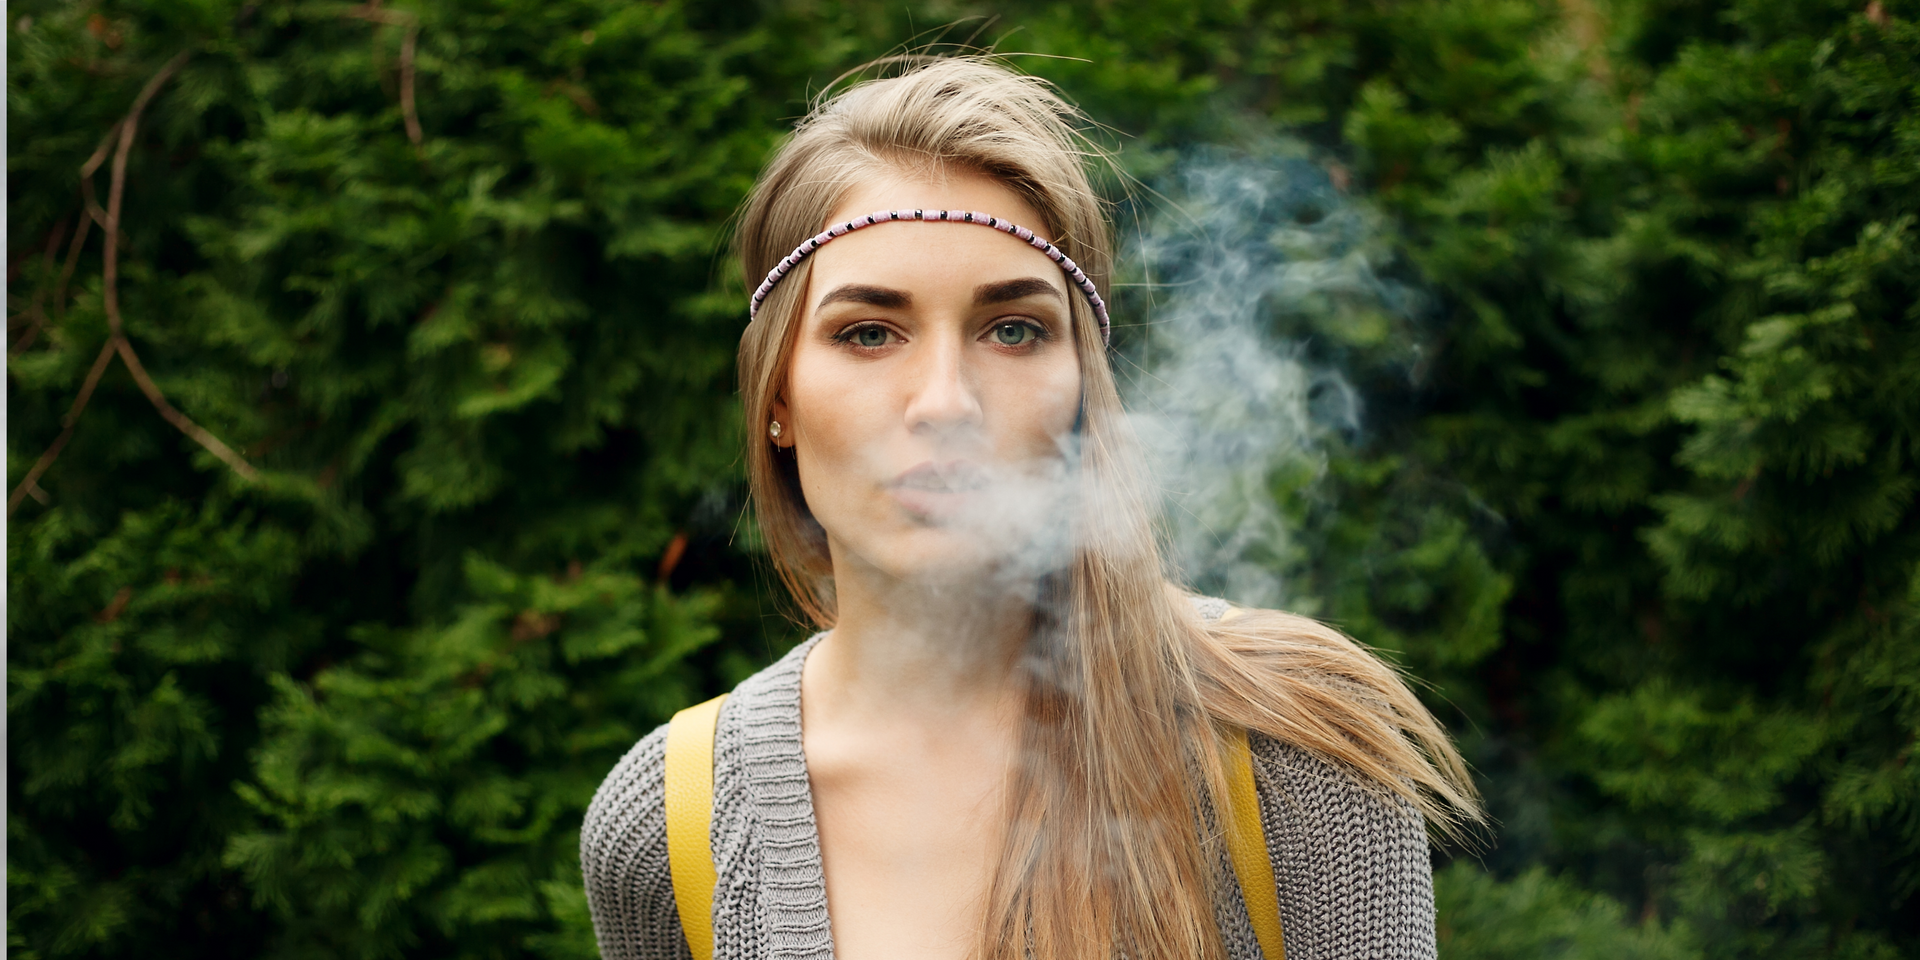 Top 5 Myths About Vaping Debunked